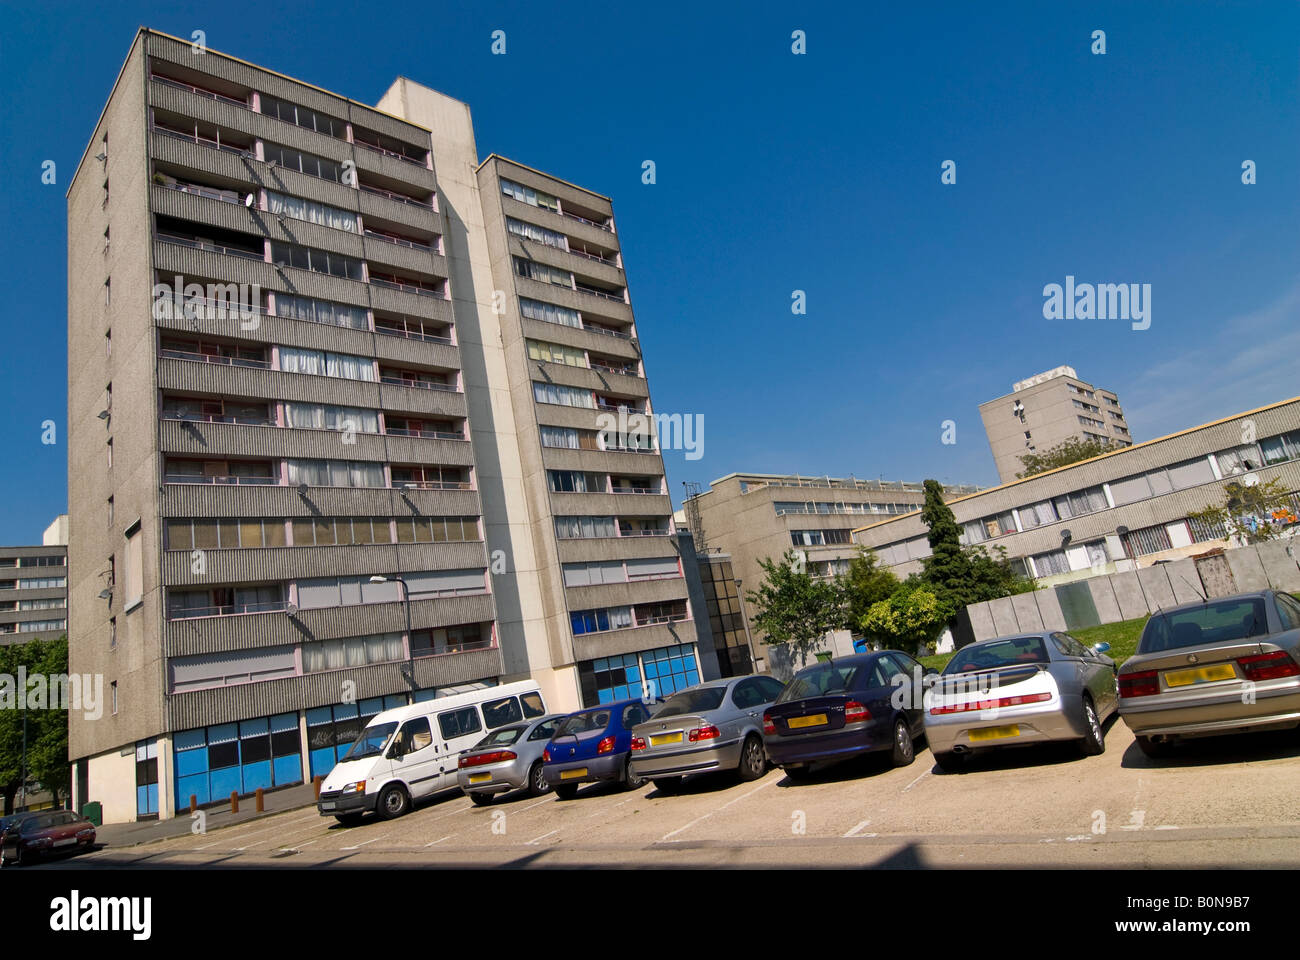 Horizontal wide angle of Wixom House one of the tower blocks comprising the Ferrier Estate in Kidbrooke Park on a sunny day Stock Photo